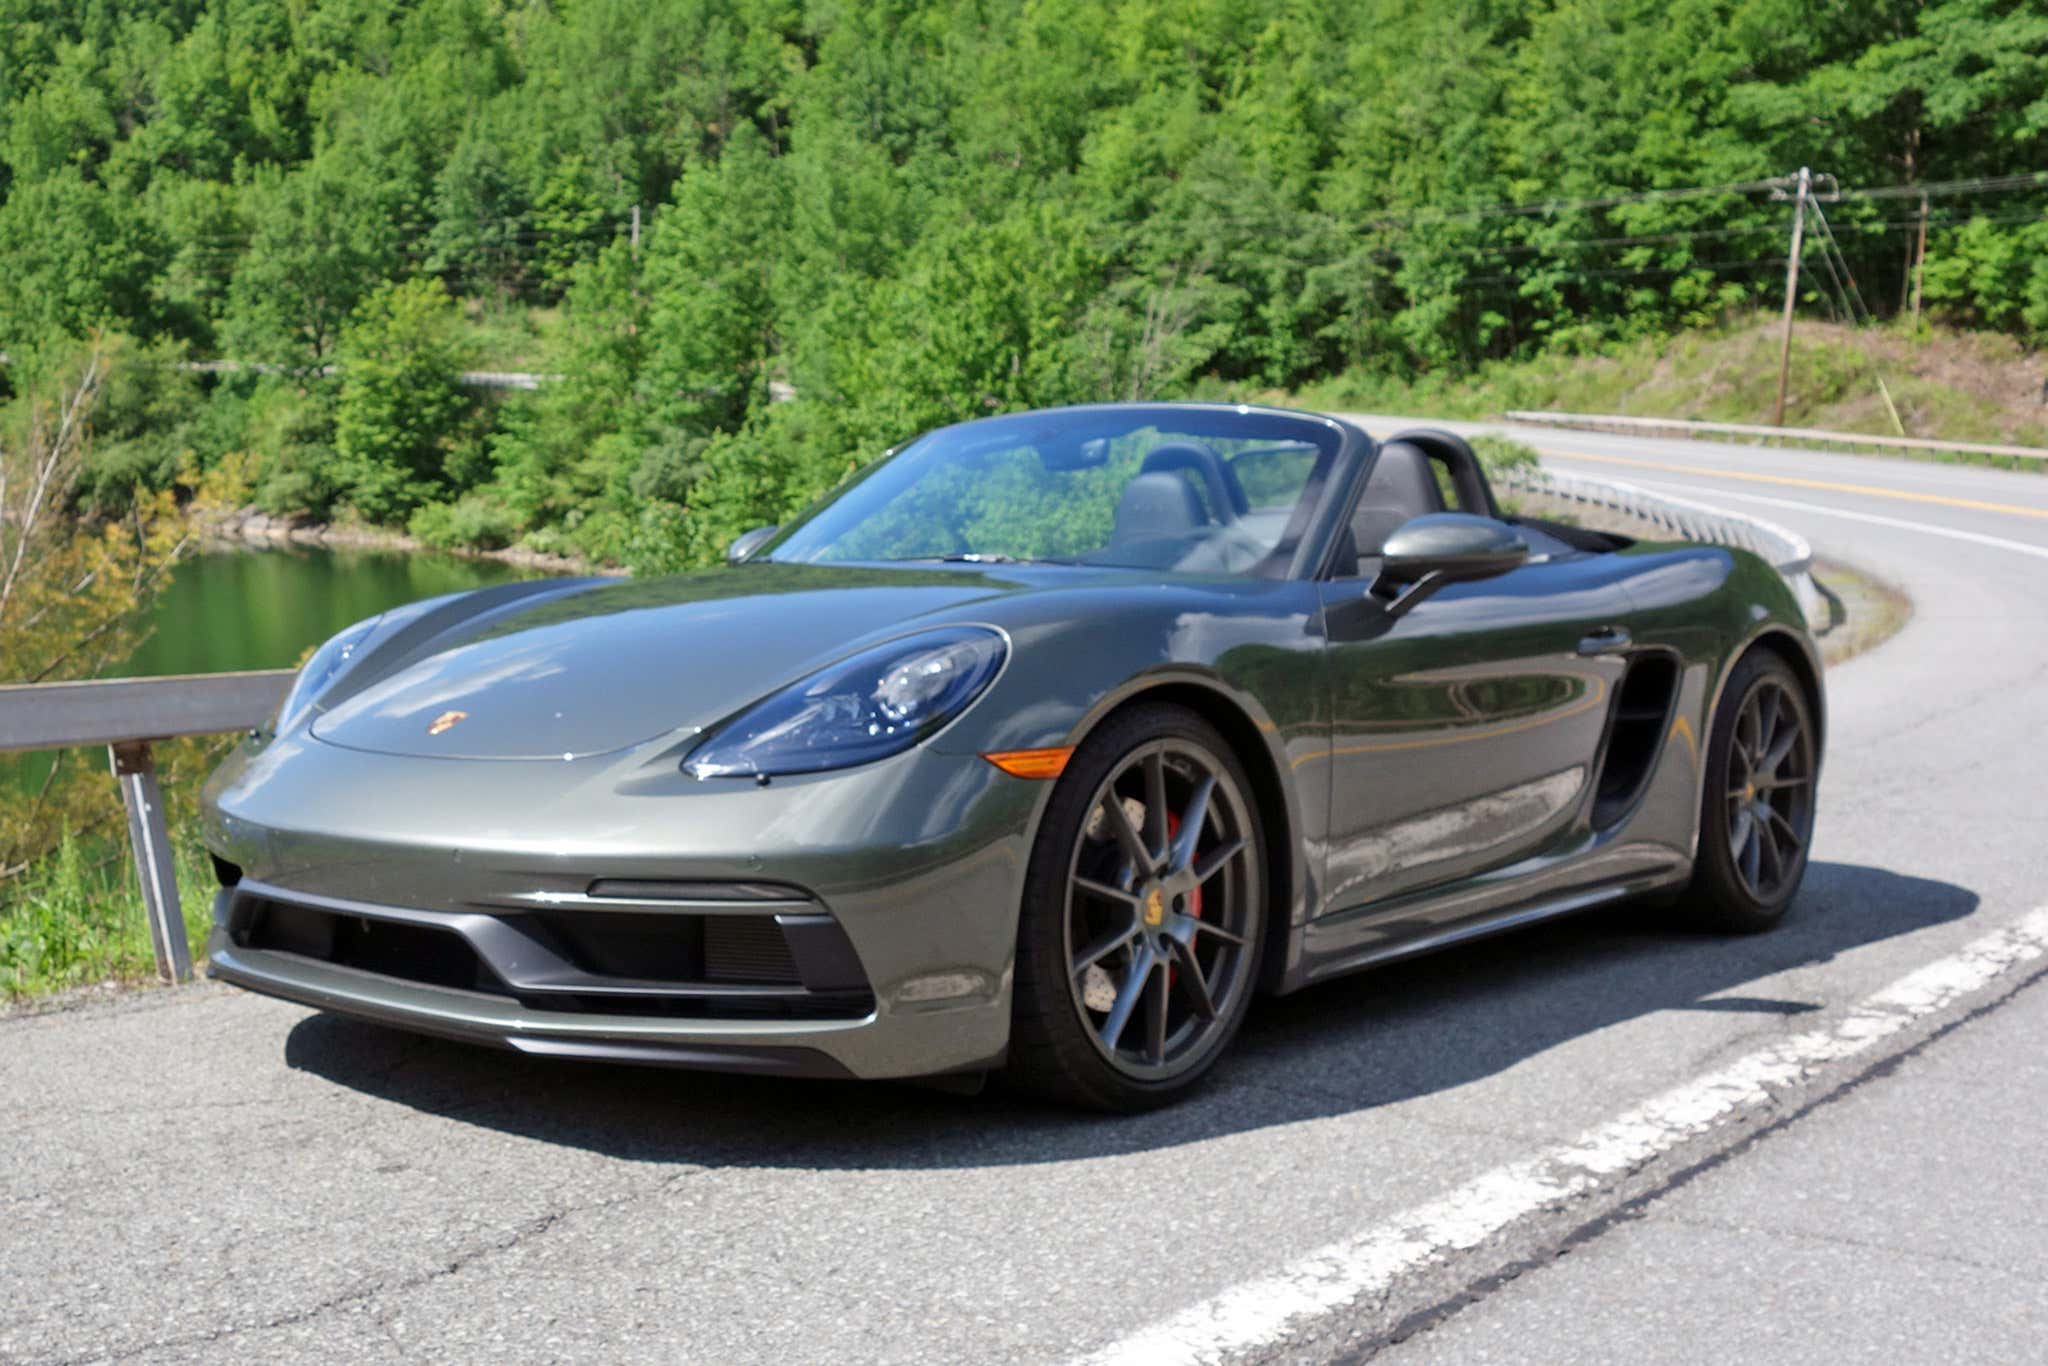 21 Porsche 718 Boxster Gts 4 0 Review The Very Best Of Now